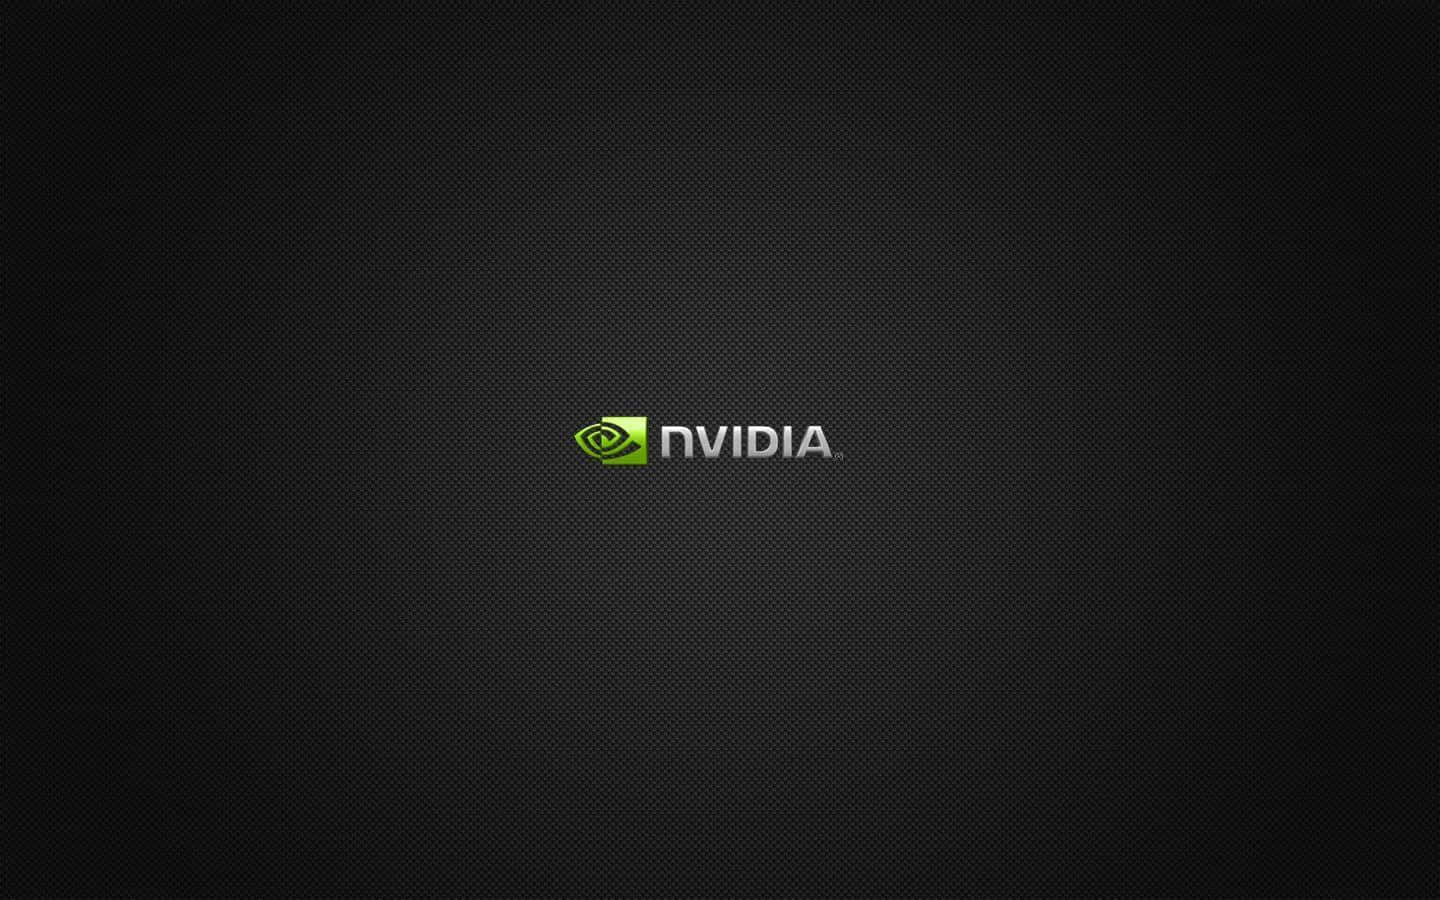 NVIDIA Graphics Processing Unit for Powerful Computing